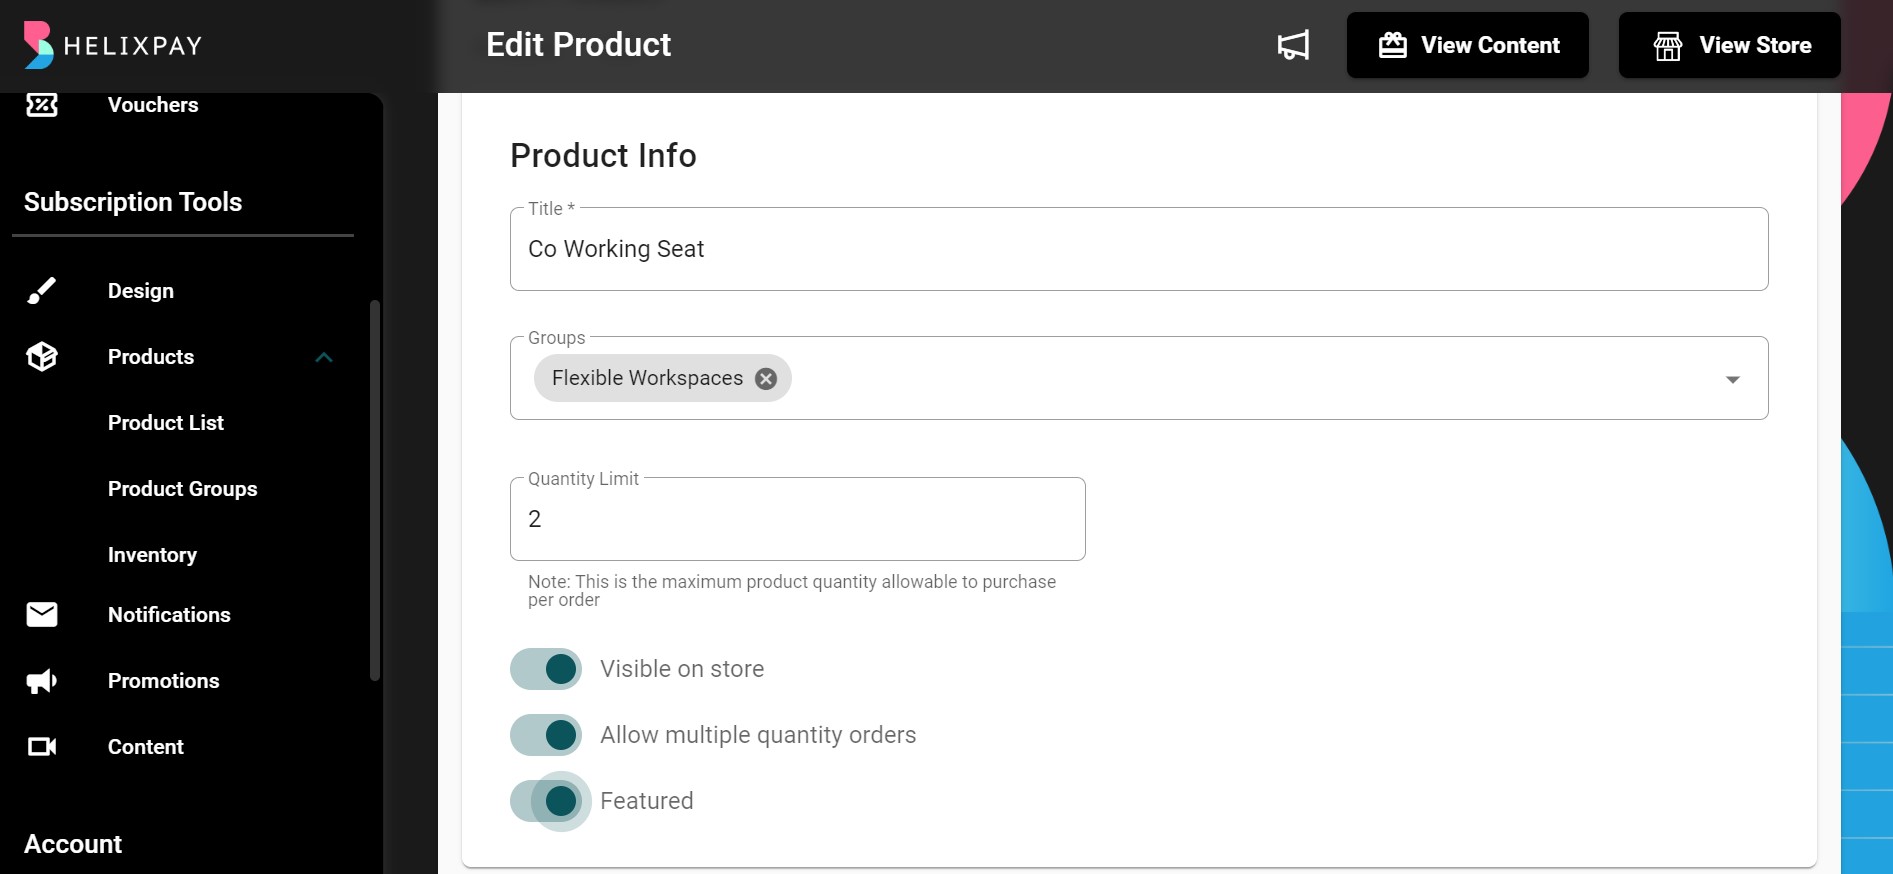 Enabling ‘Allow multiple quantity orders’ will let the customer order more than one quantity of the product.